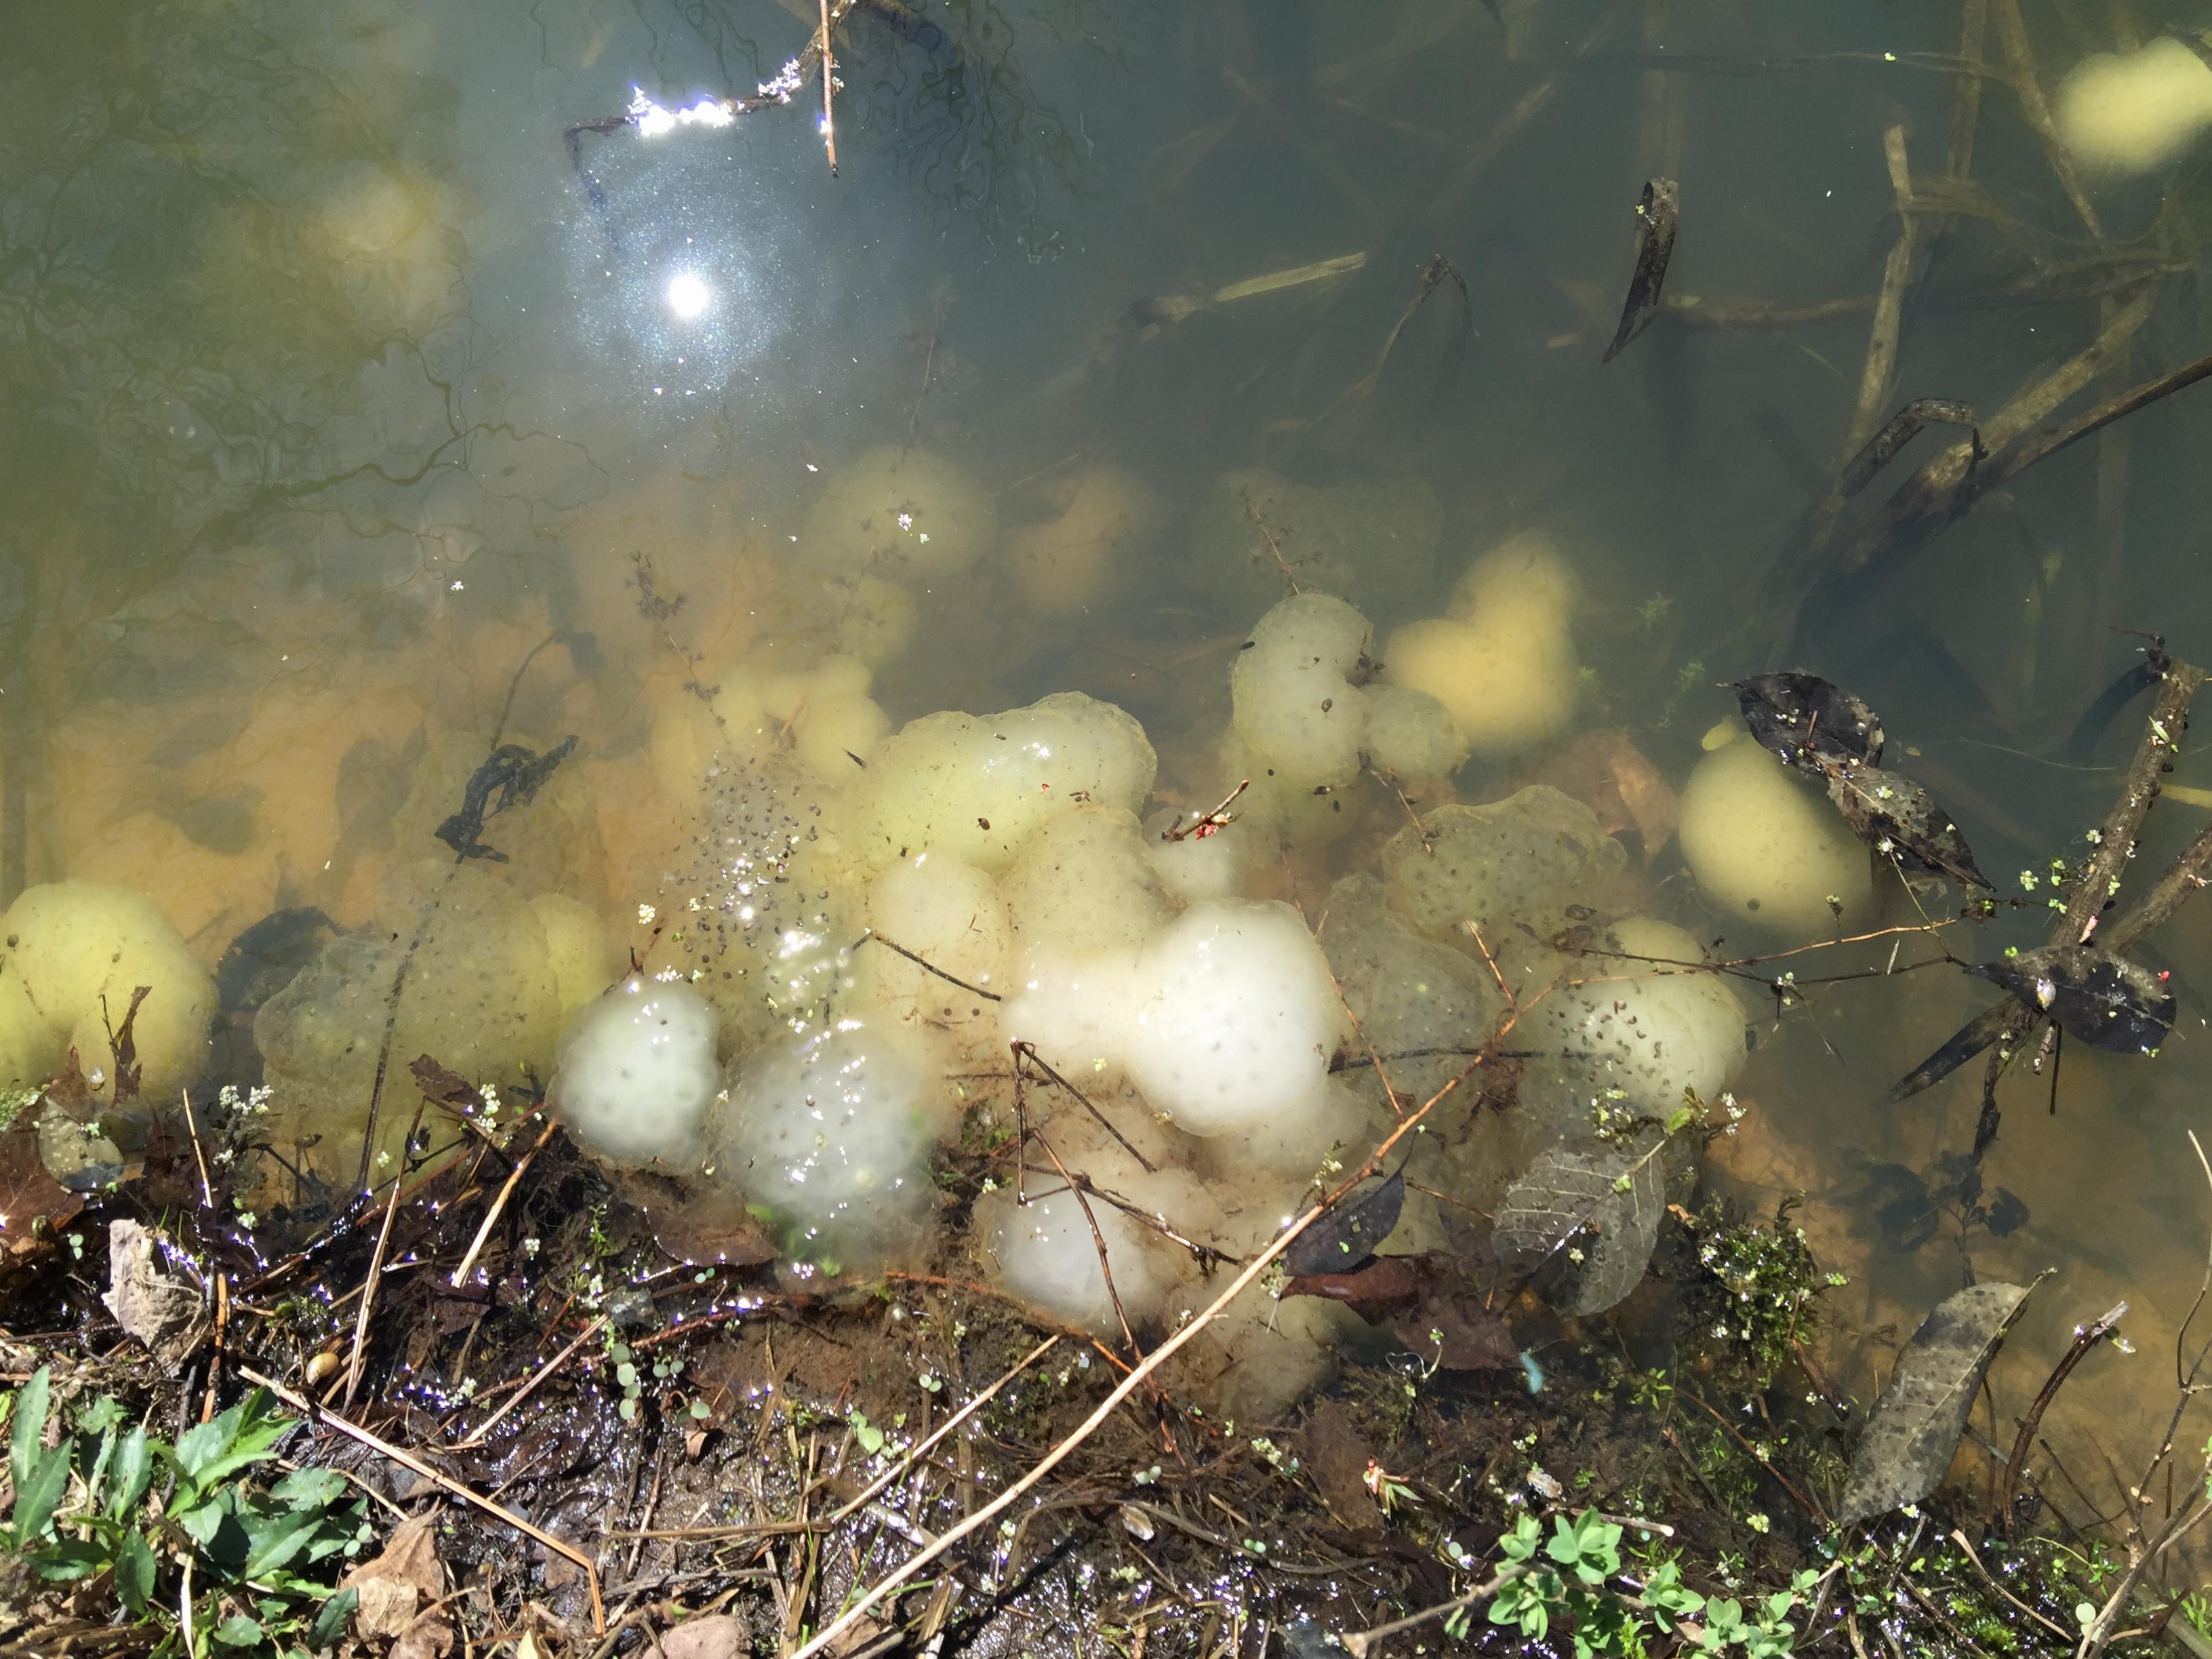 Amphibian Eggs in Allegany County, NY State